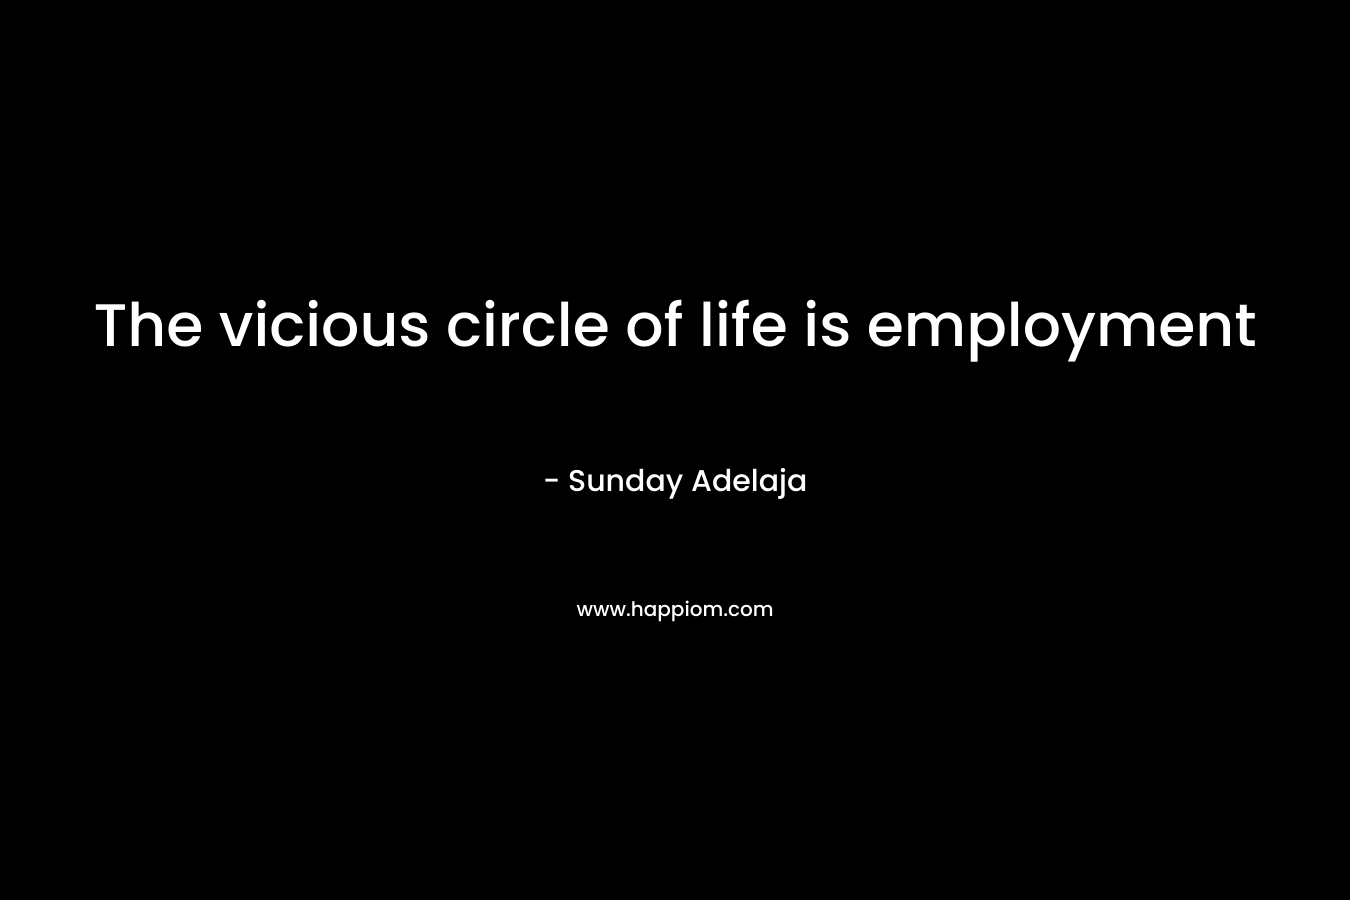 The vicious circle of life is employment